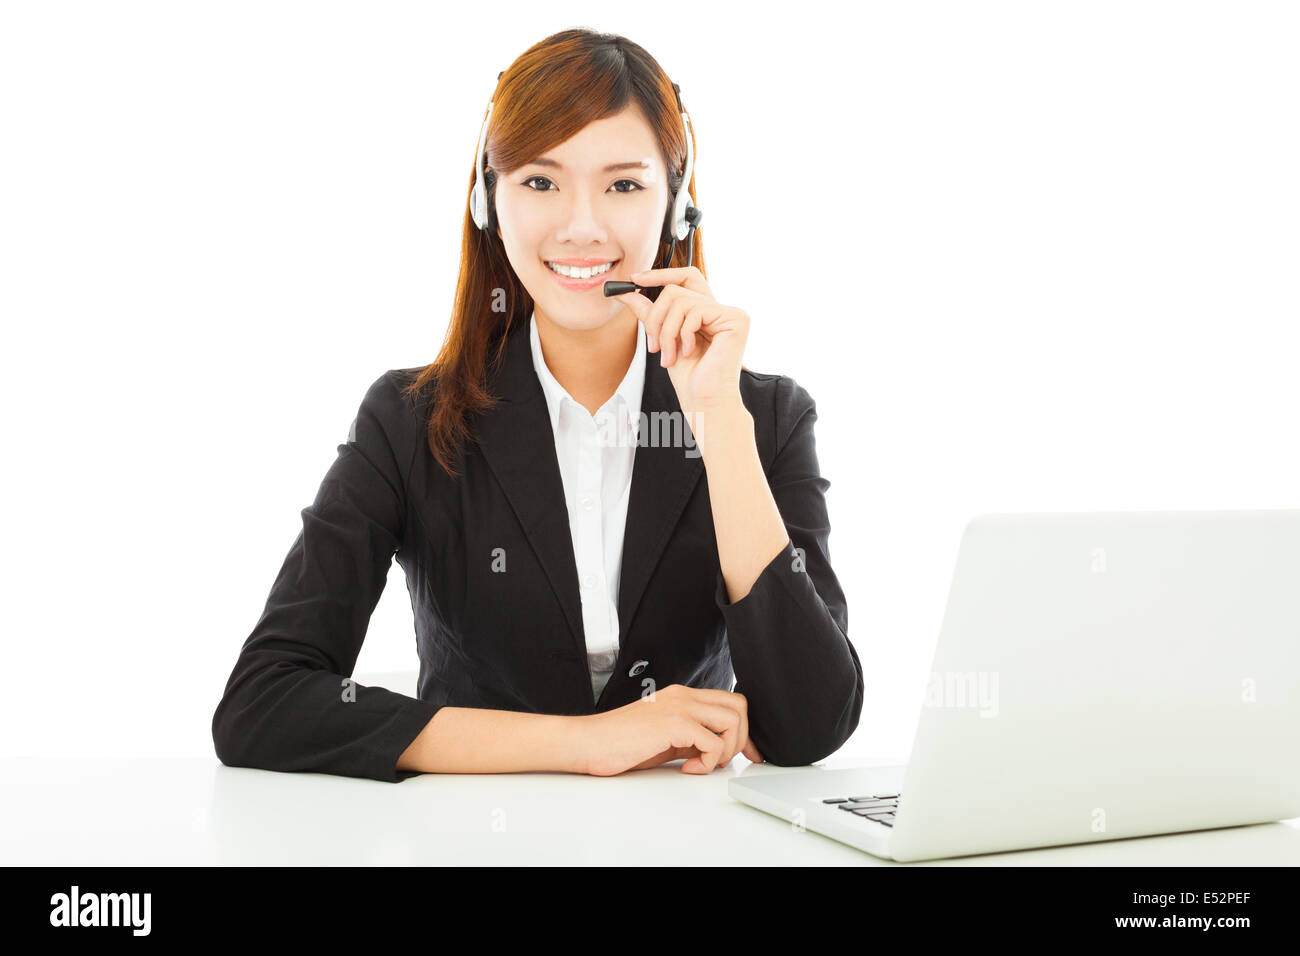 Young professional business woman with earphone and laptop Stock Photo